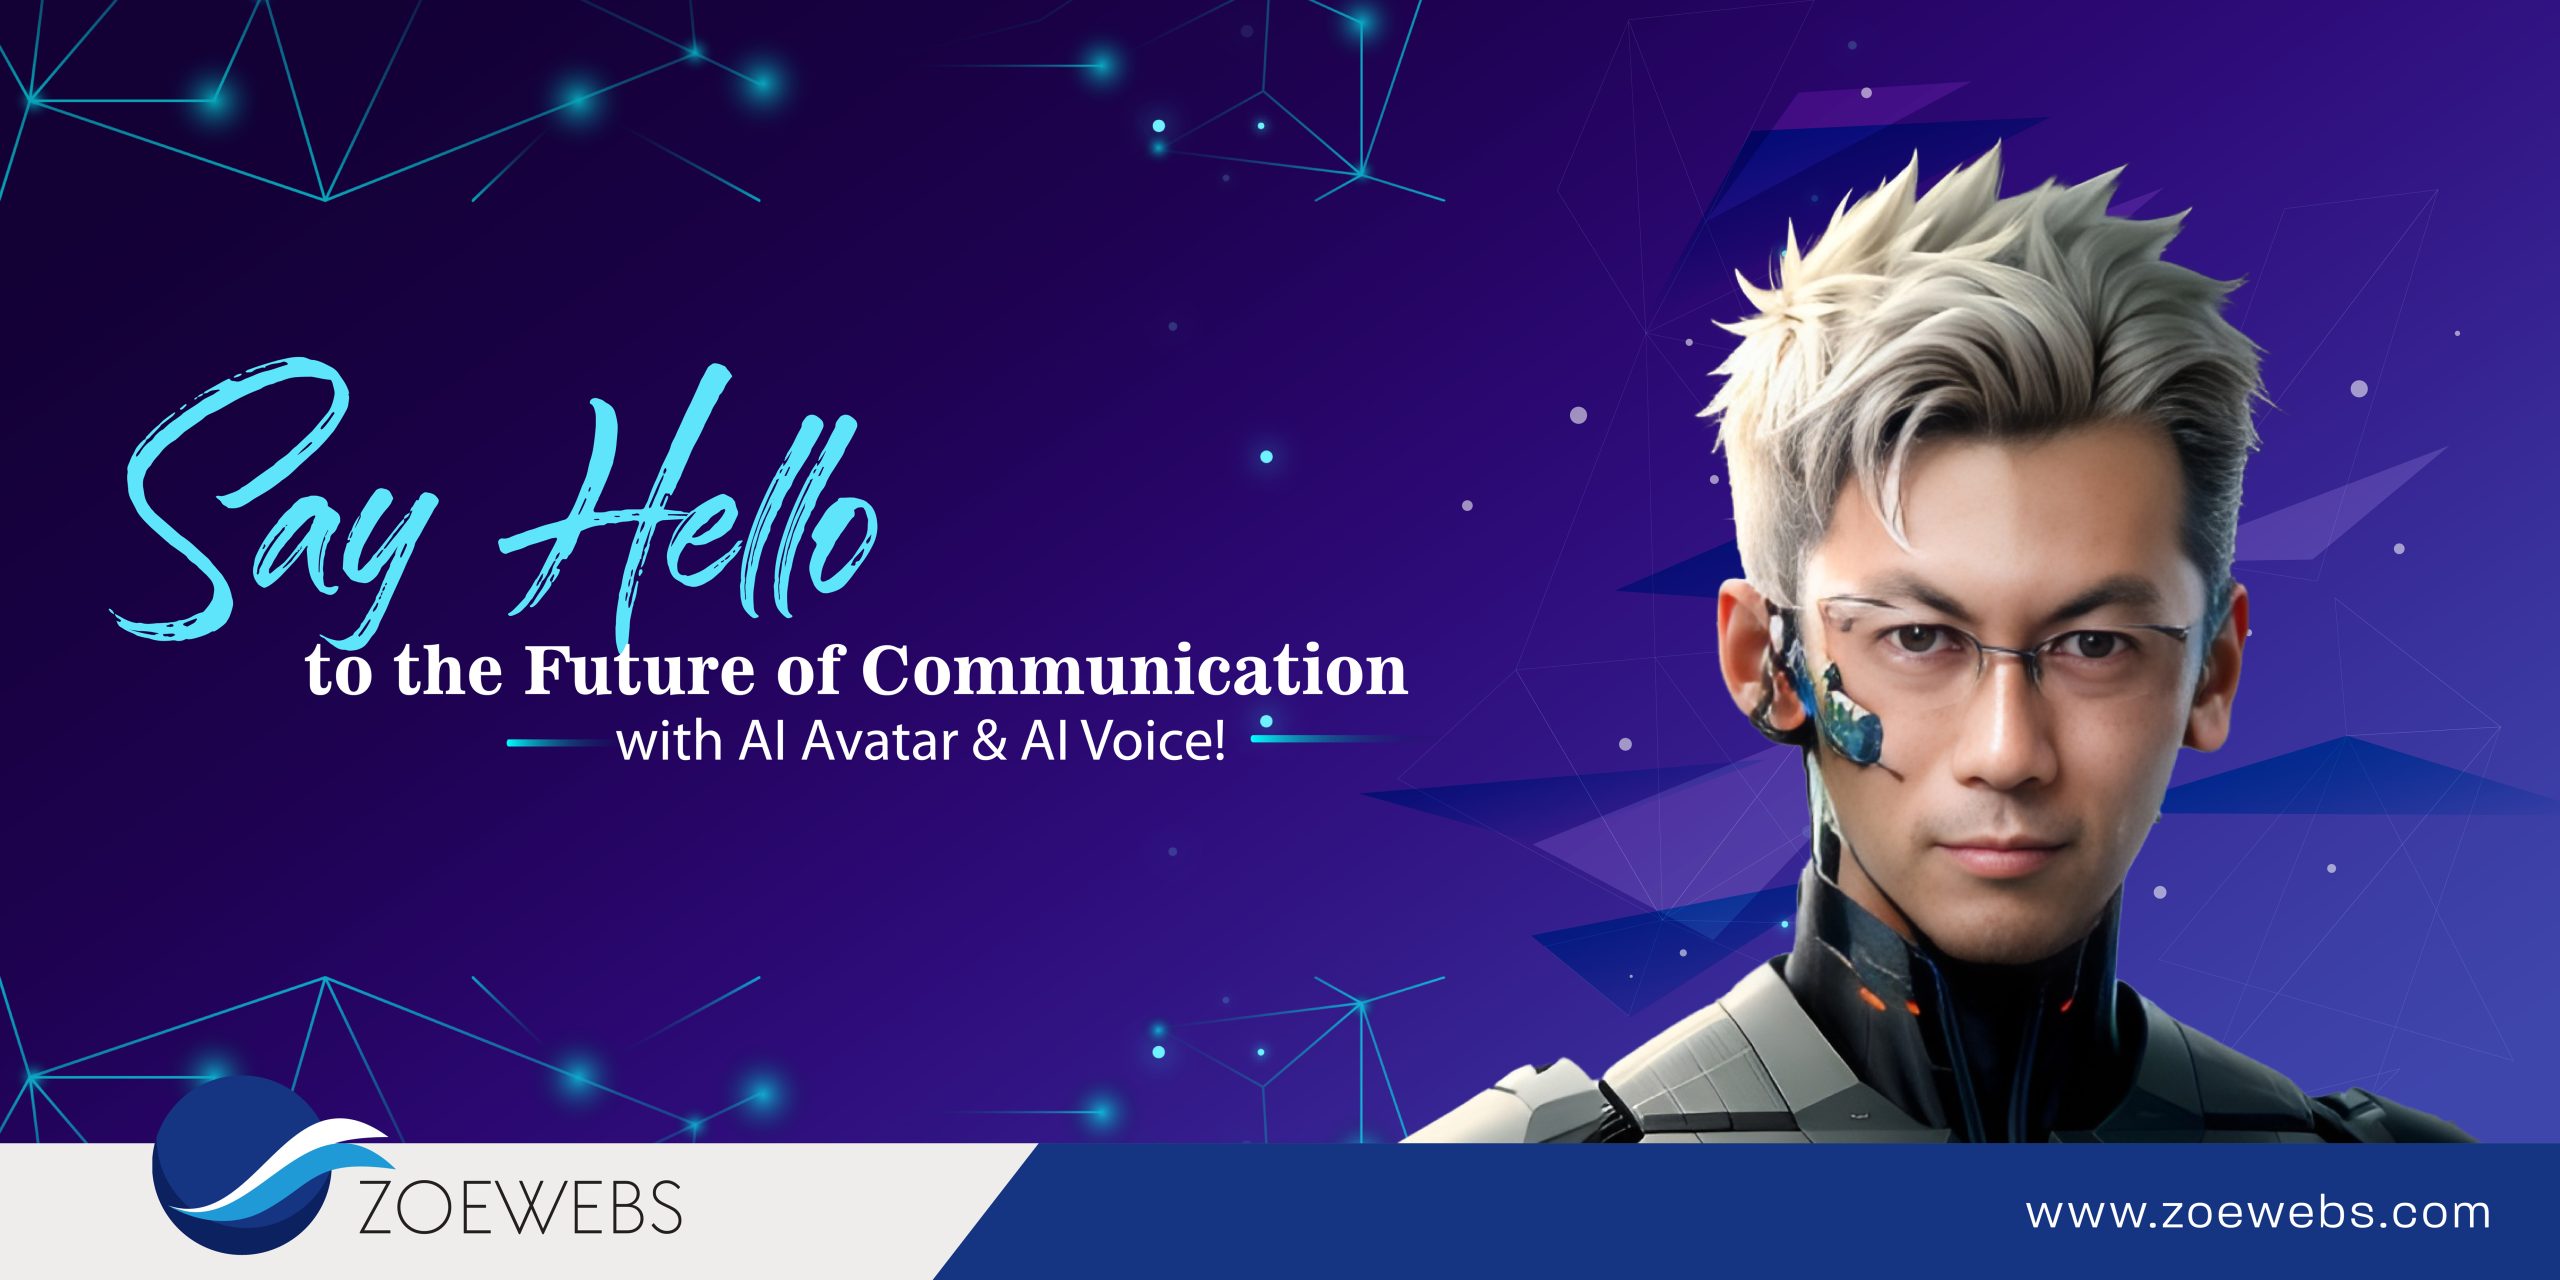 Say Hello to the Future of Communication with AI Avatar & AI Voice!